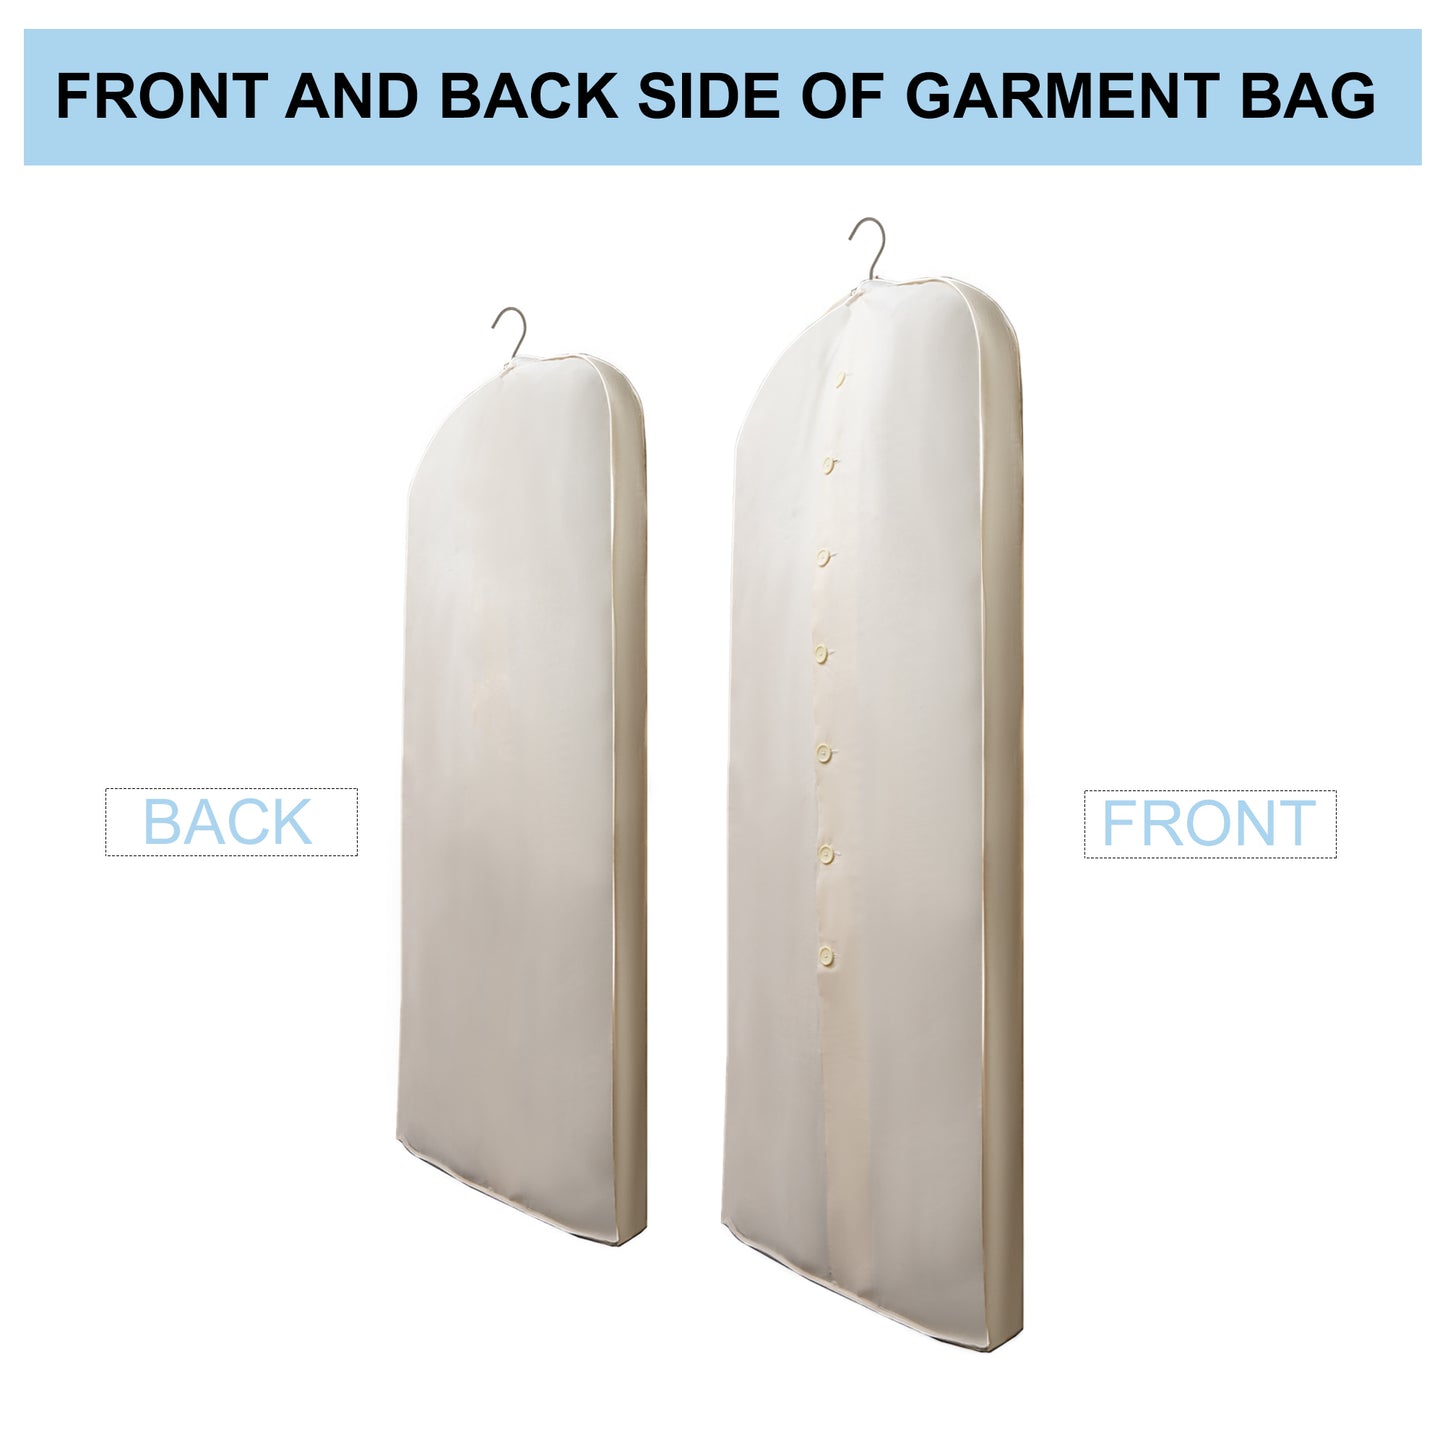 62" x 24" x 4" Premium garment bags: Protect your clothes in style.